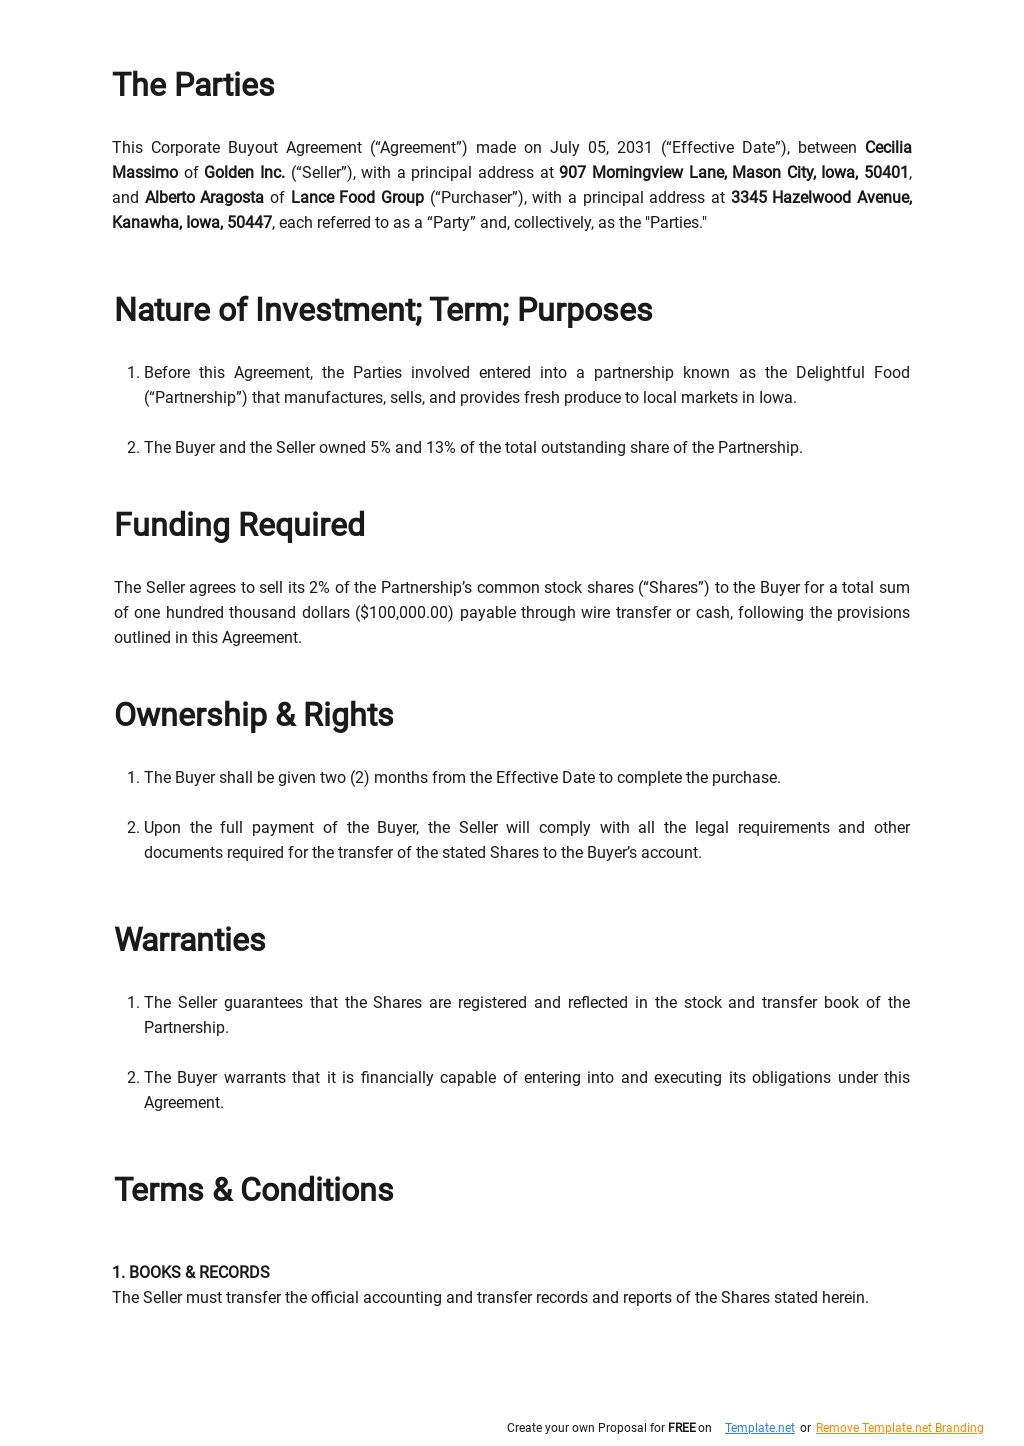 Corporate Buyout Agreement Template 1.jpe